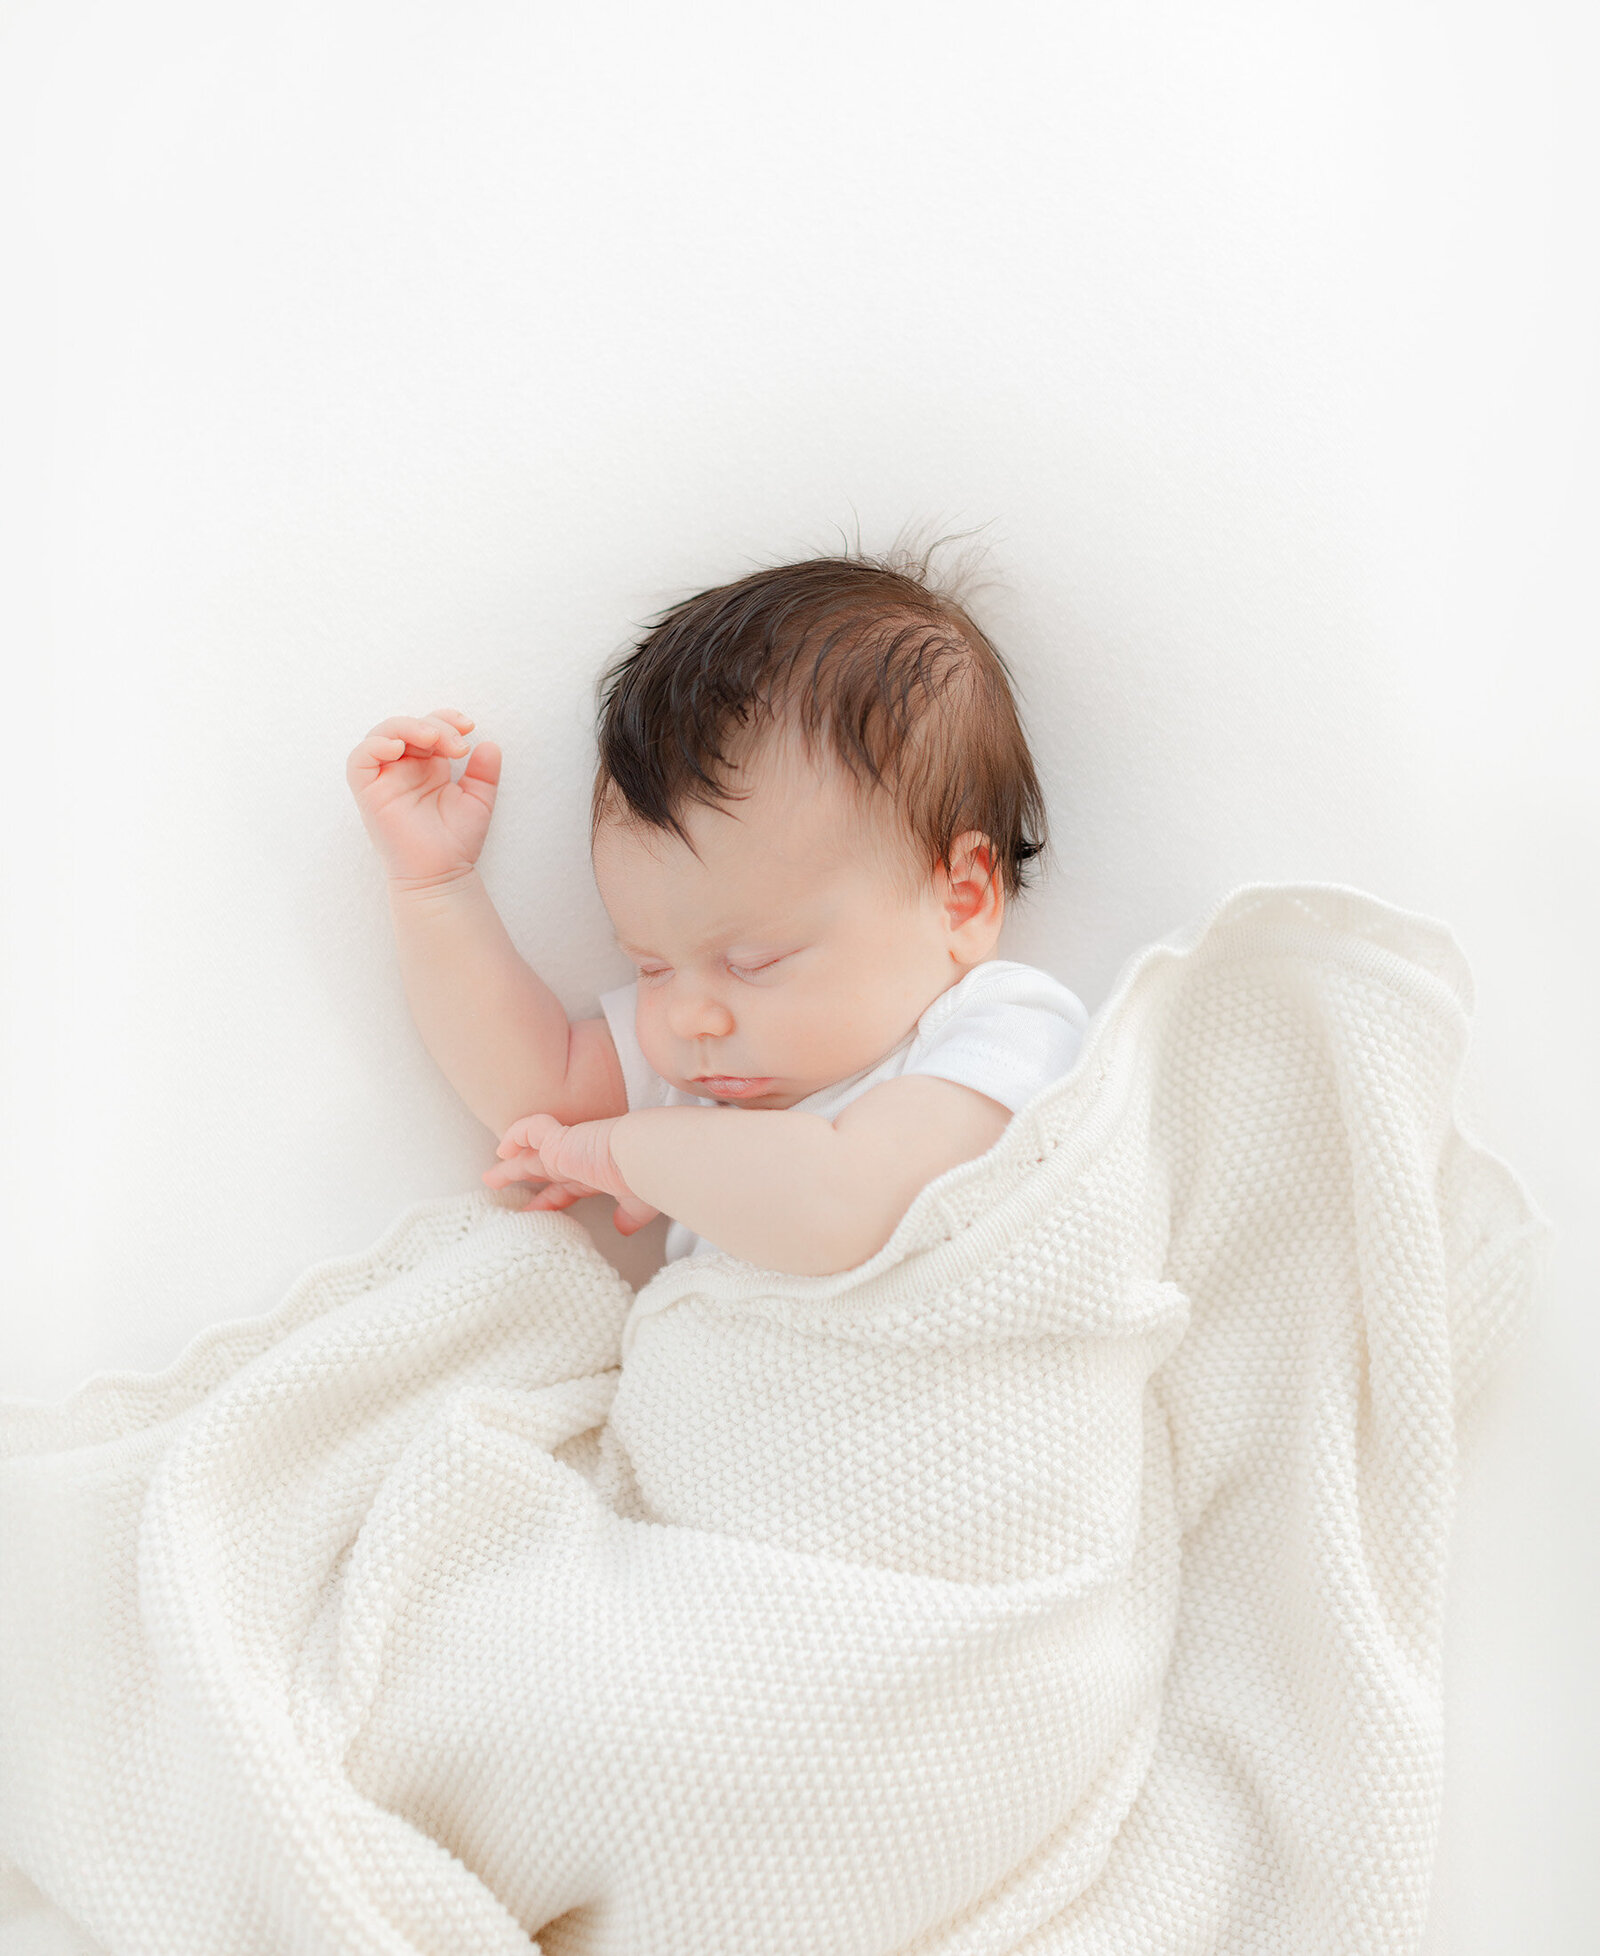 sleeping newborn wrapped loosely in textured blanket